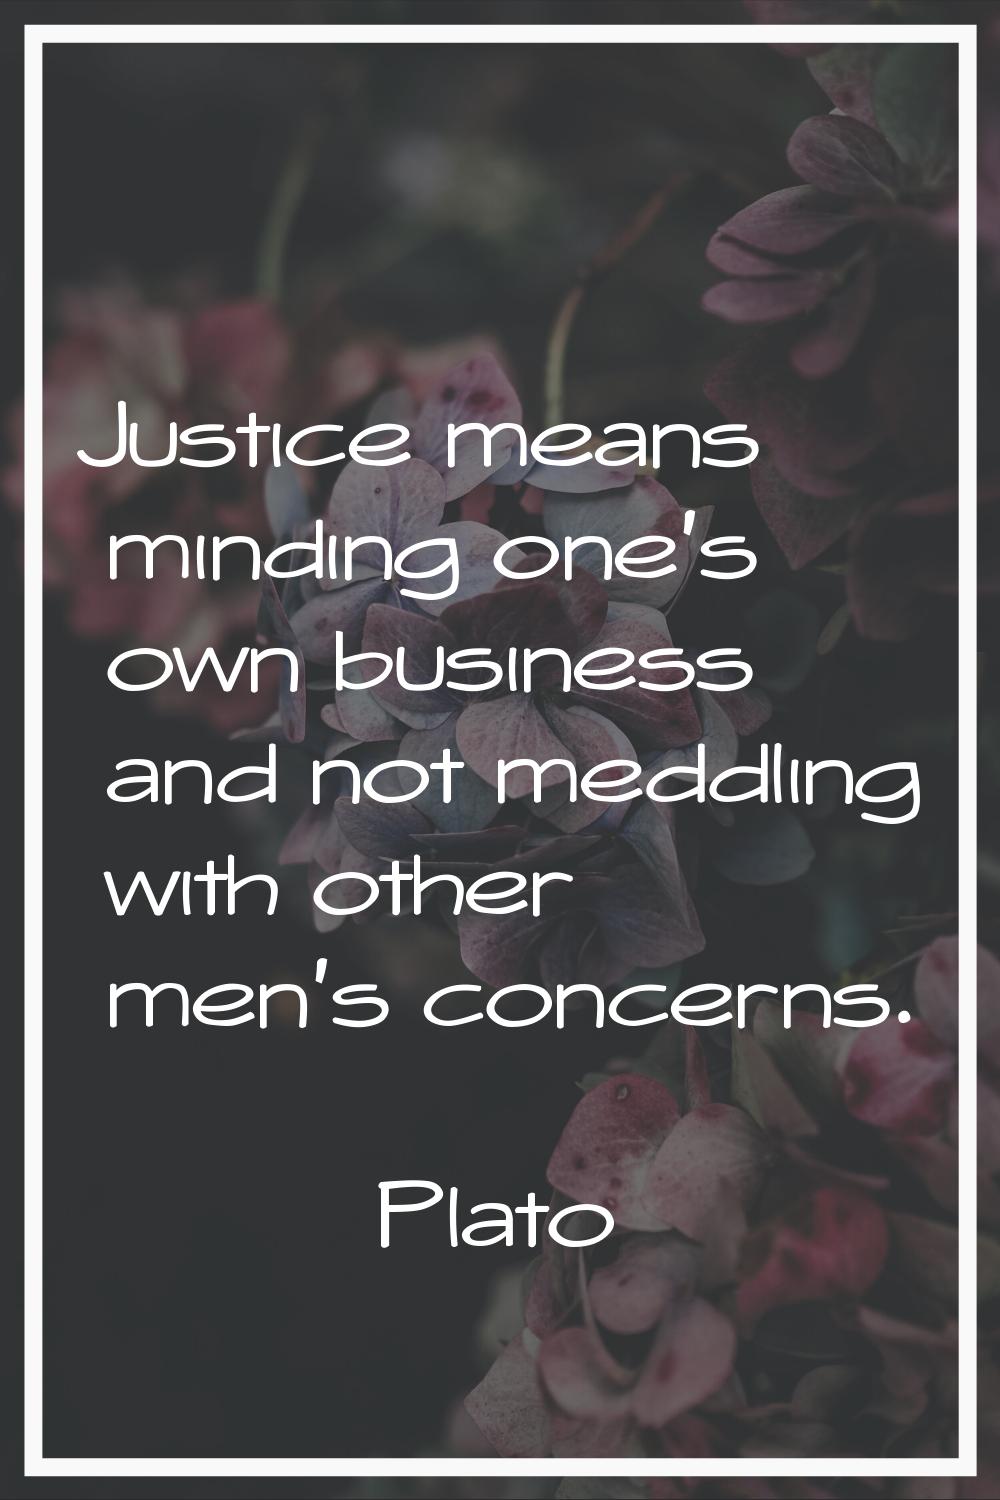 Justice means minding one's own business and not meddling with other men's concerns.